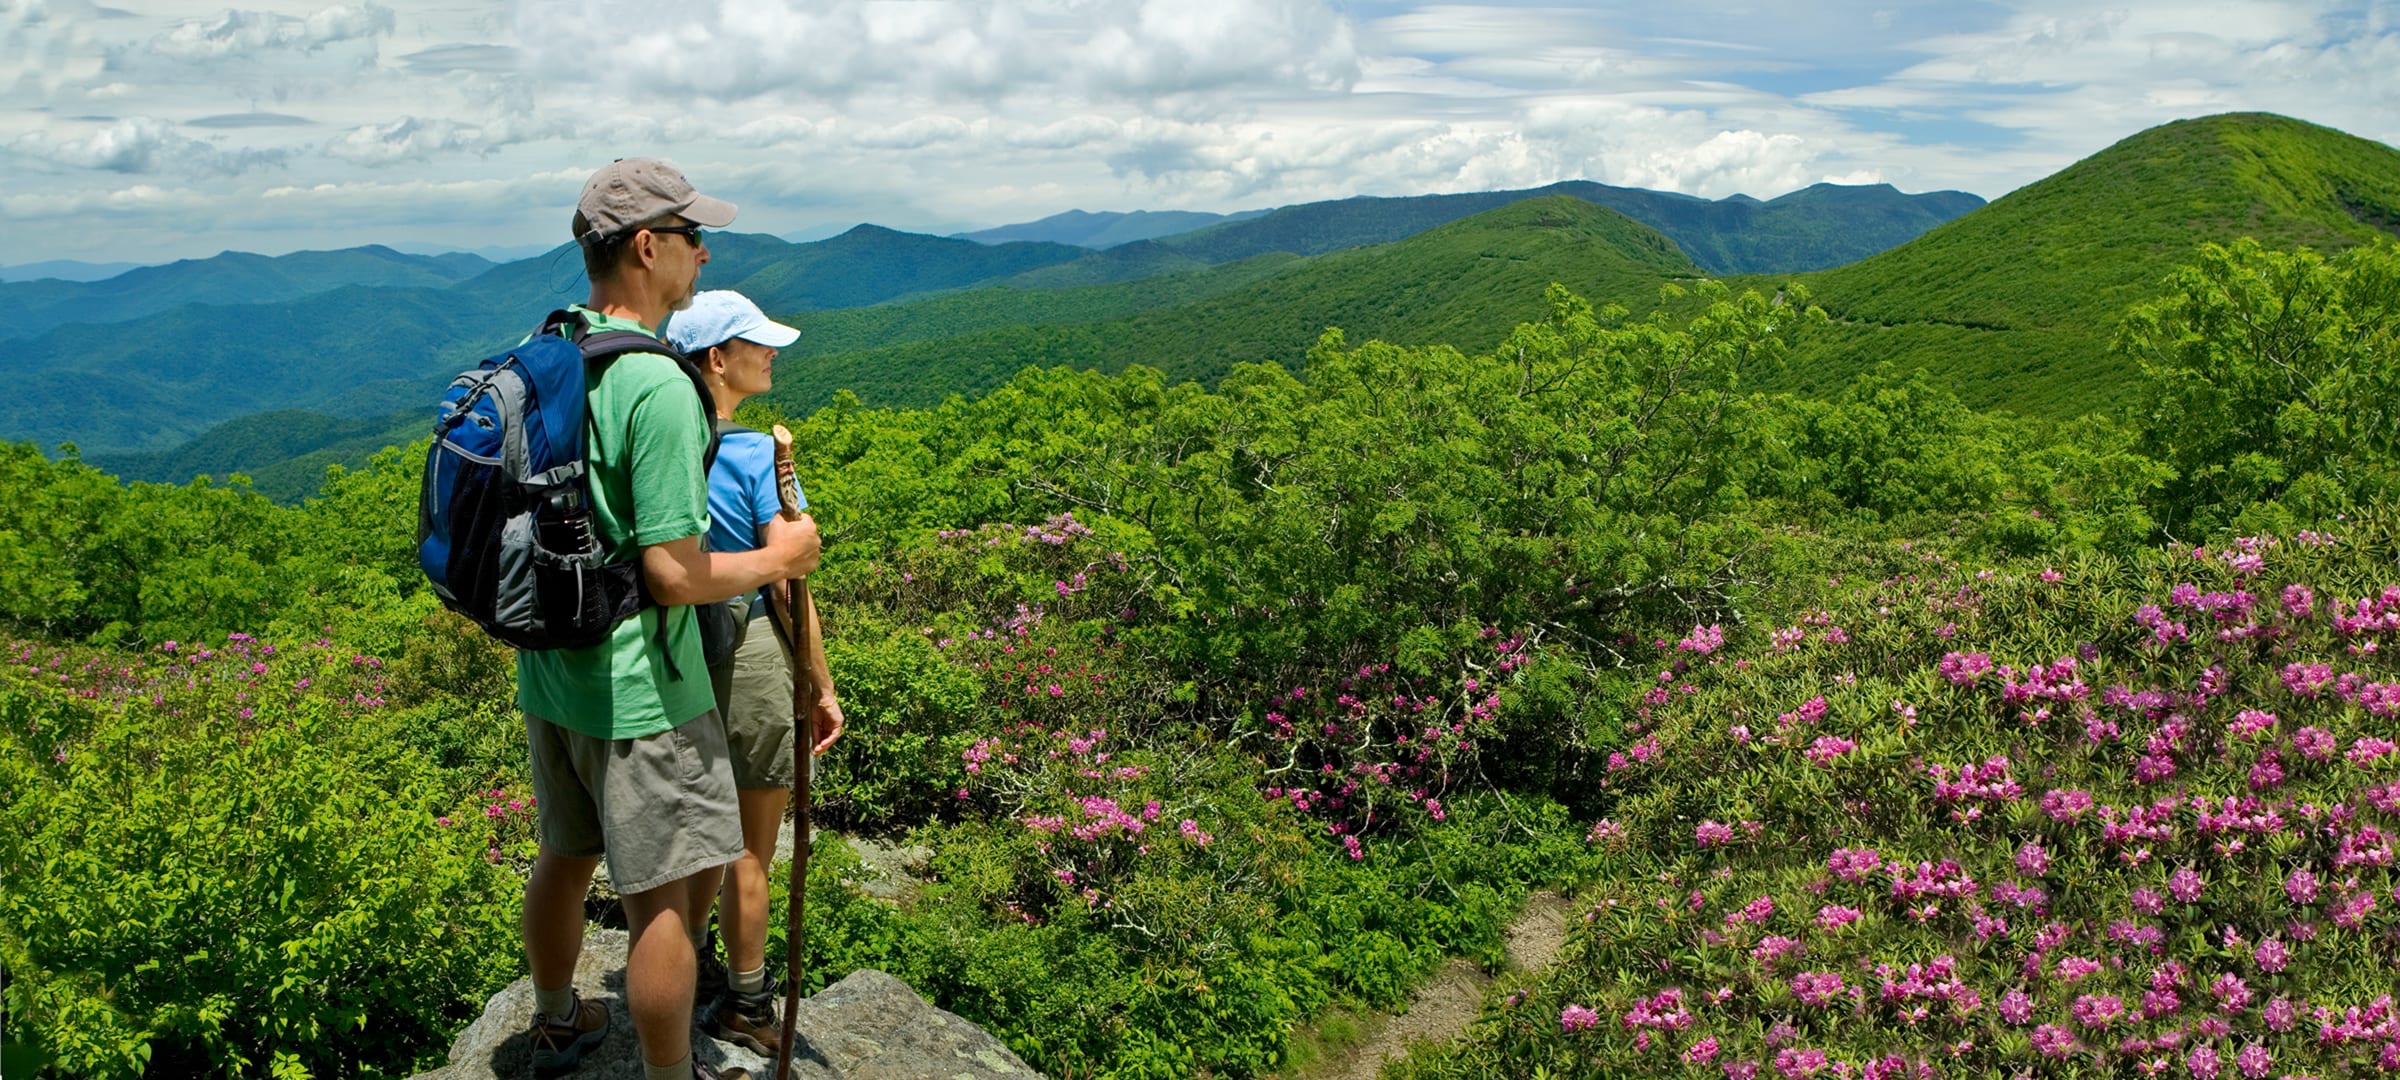 6 Great Places to Hike in Western North Carolina